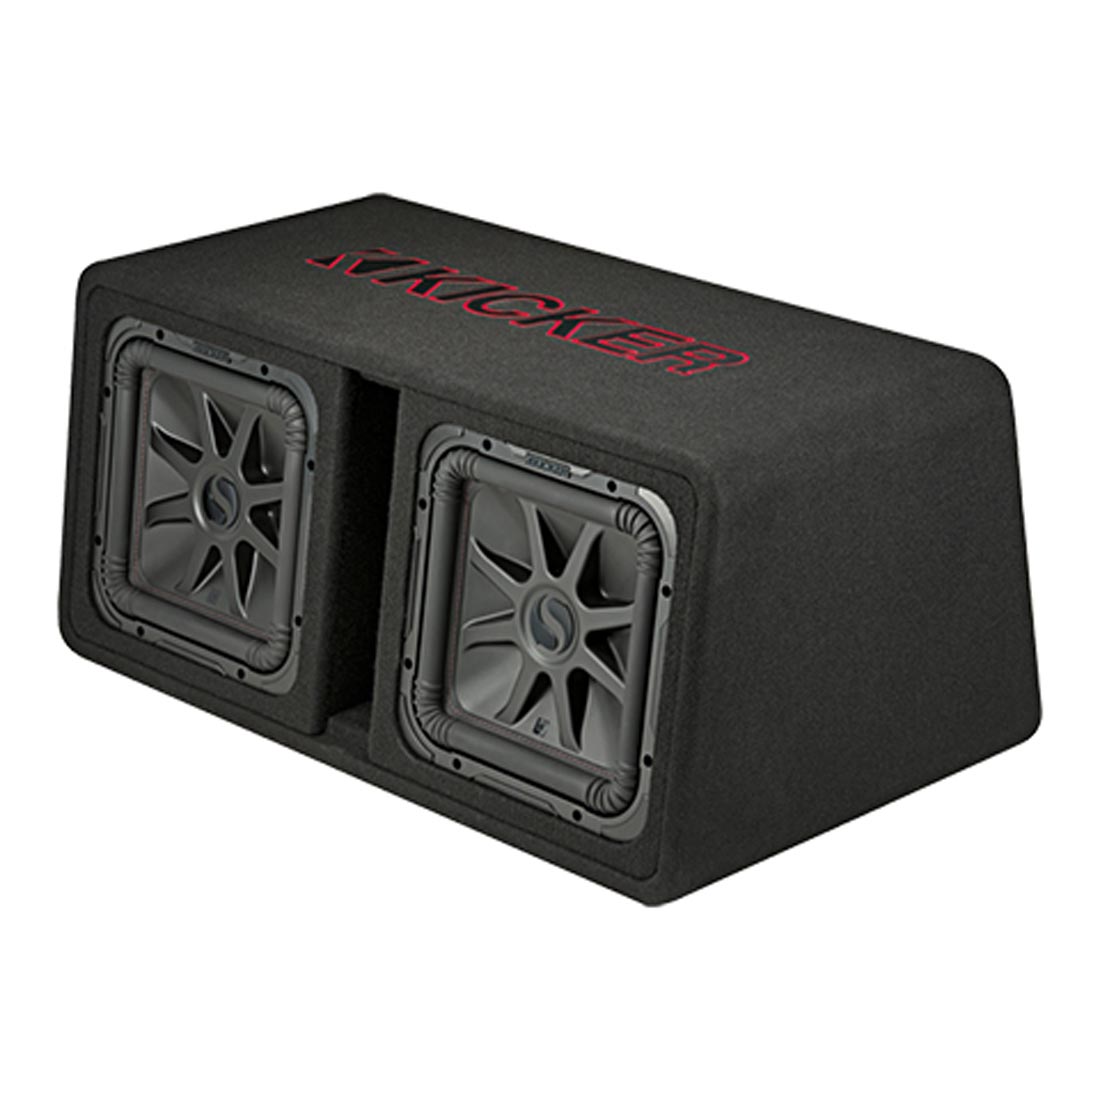 Kicker 45DL7R122 1200W Loaded 2-Ohm Vented Enclosure with Dual Solo-Baric L7R 12" Subwoofers